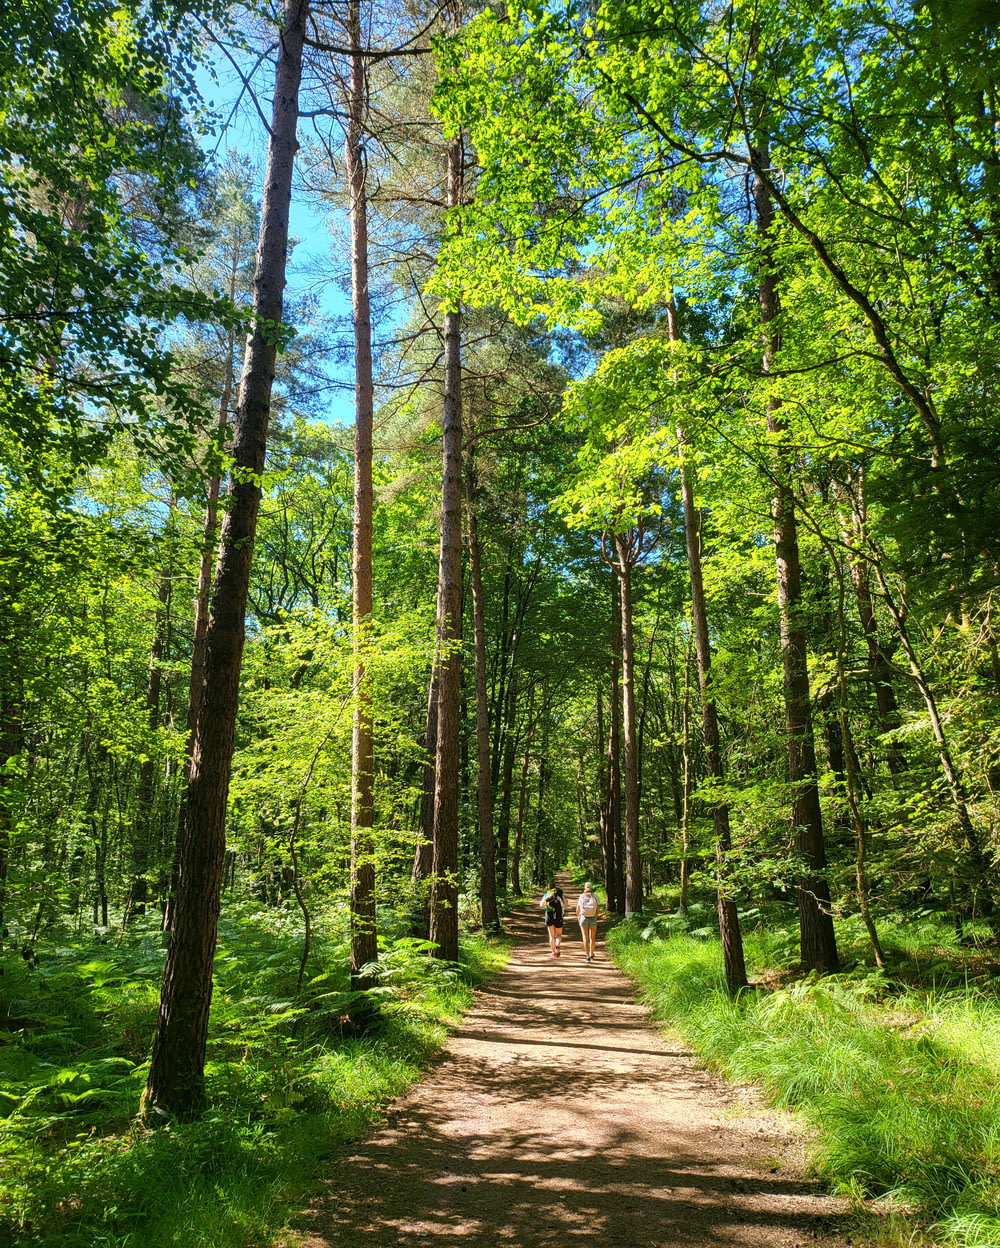 a couple people walking on a dirt path through a forest